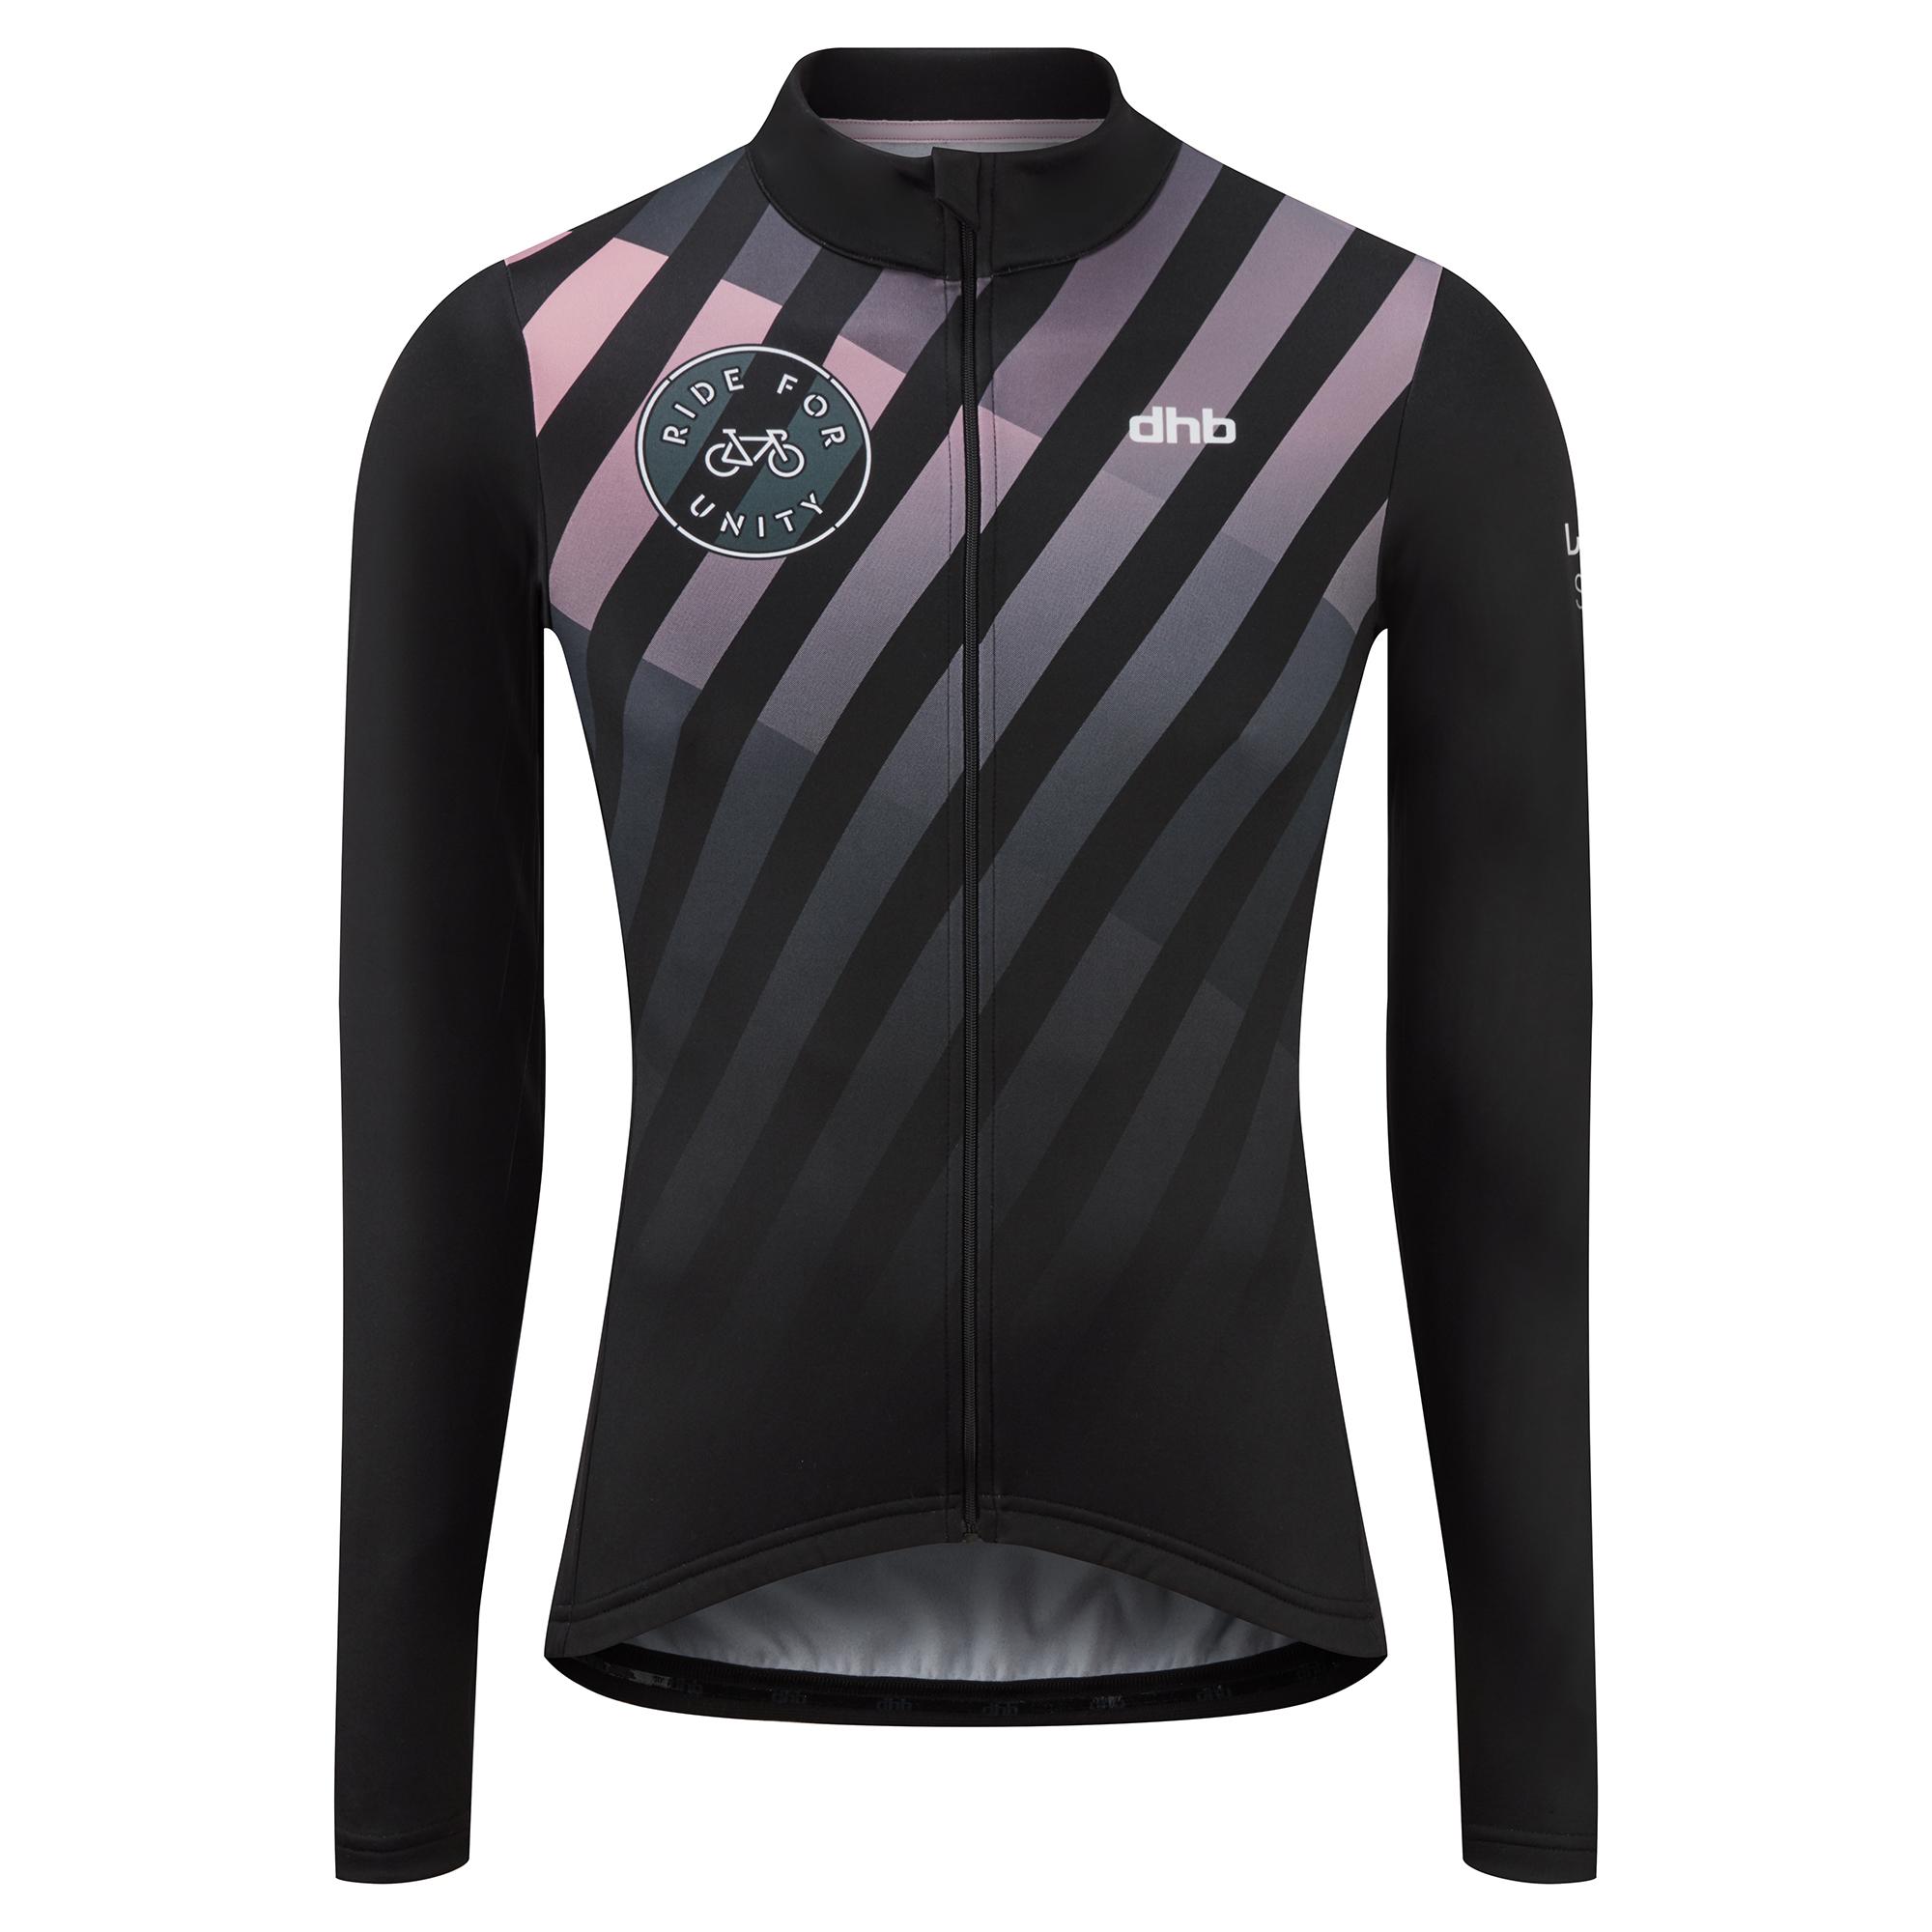 Dhb Ride For Unity Long Sleeve Jersey  Black/pink